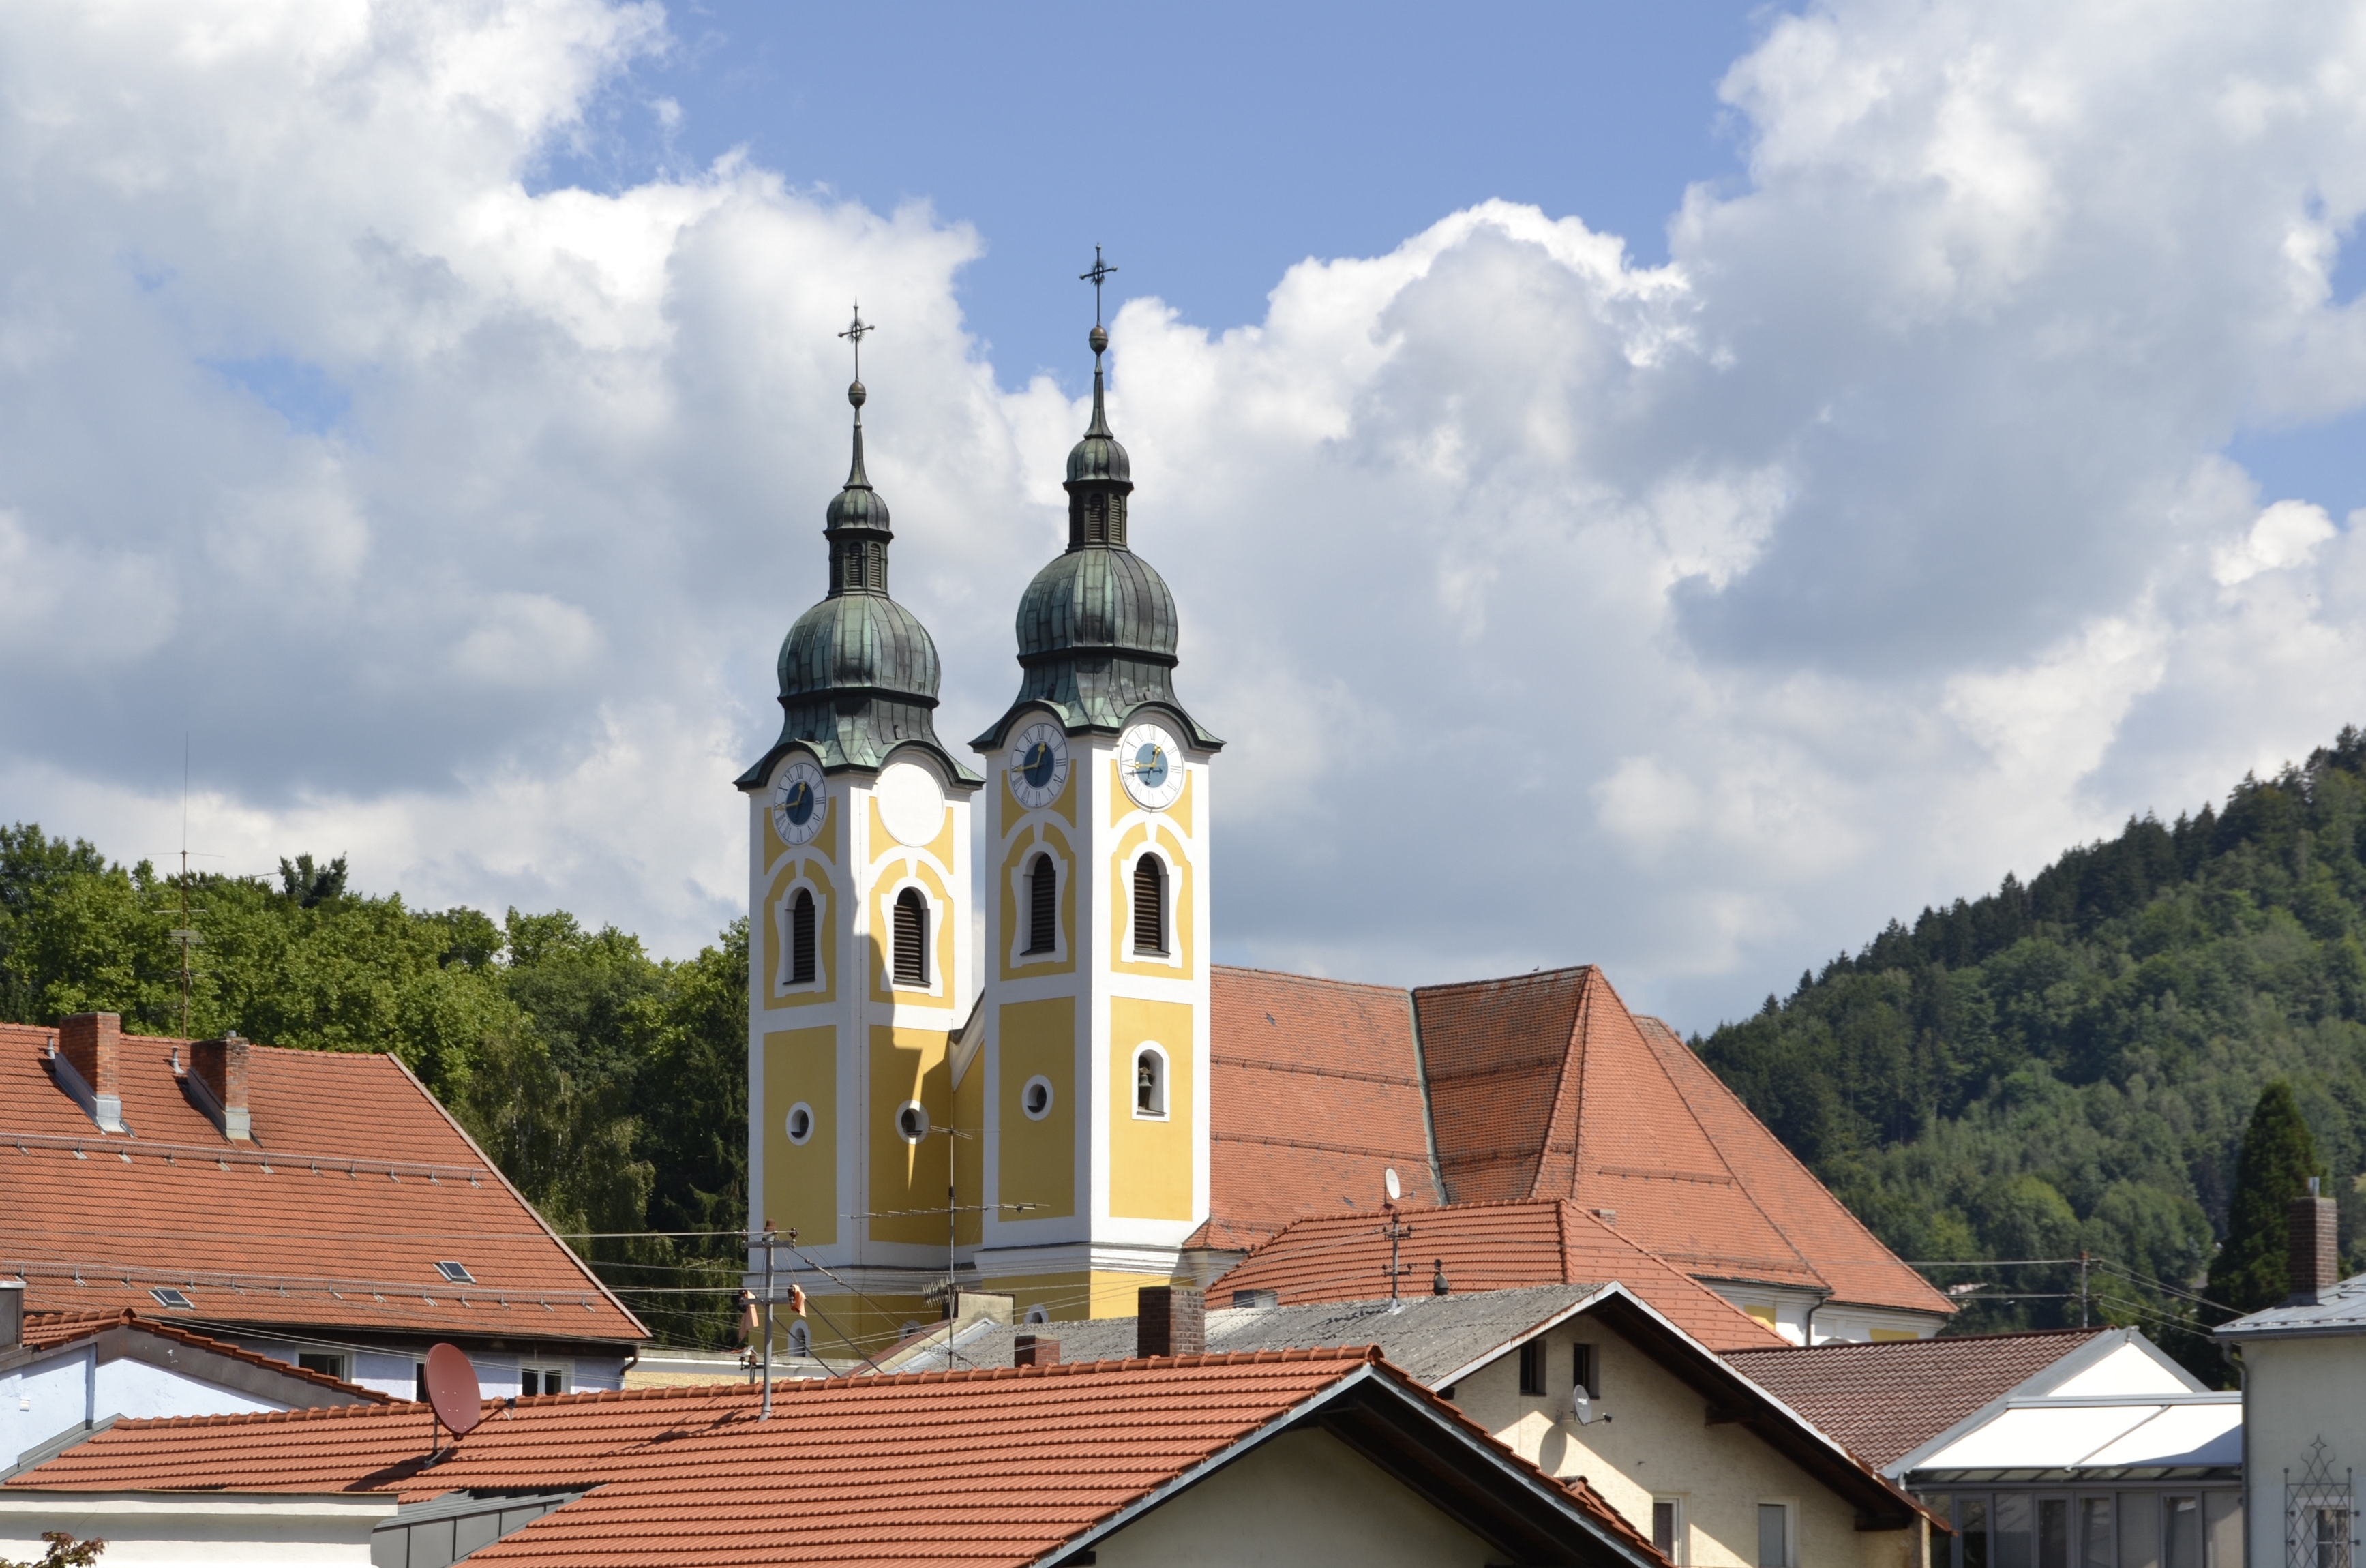 View over the roofs of Obernzell in Bavaria